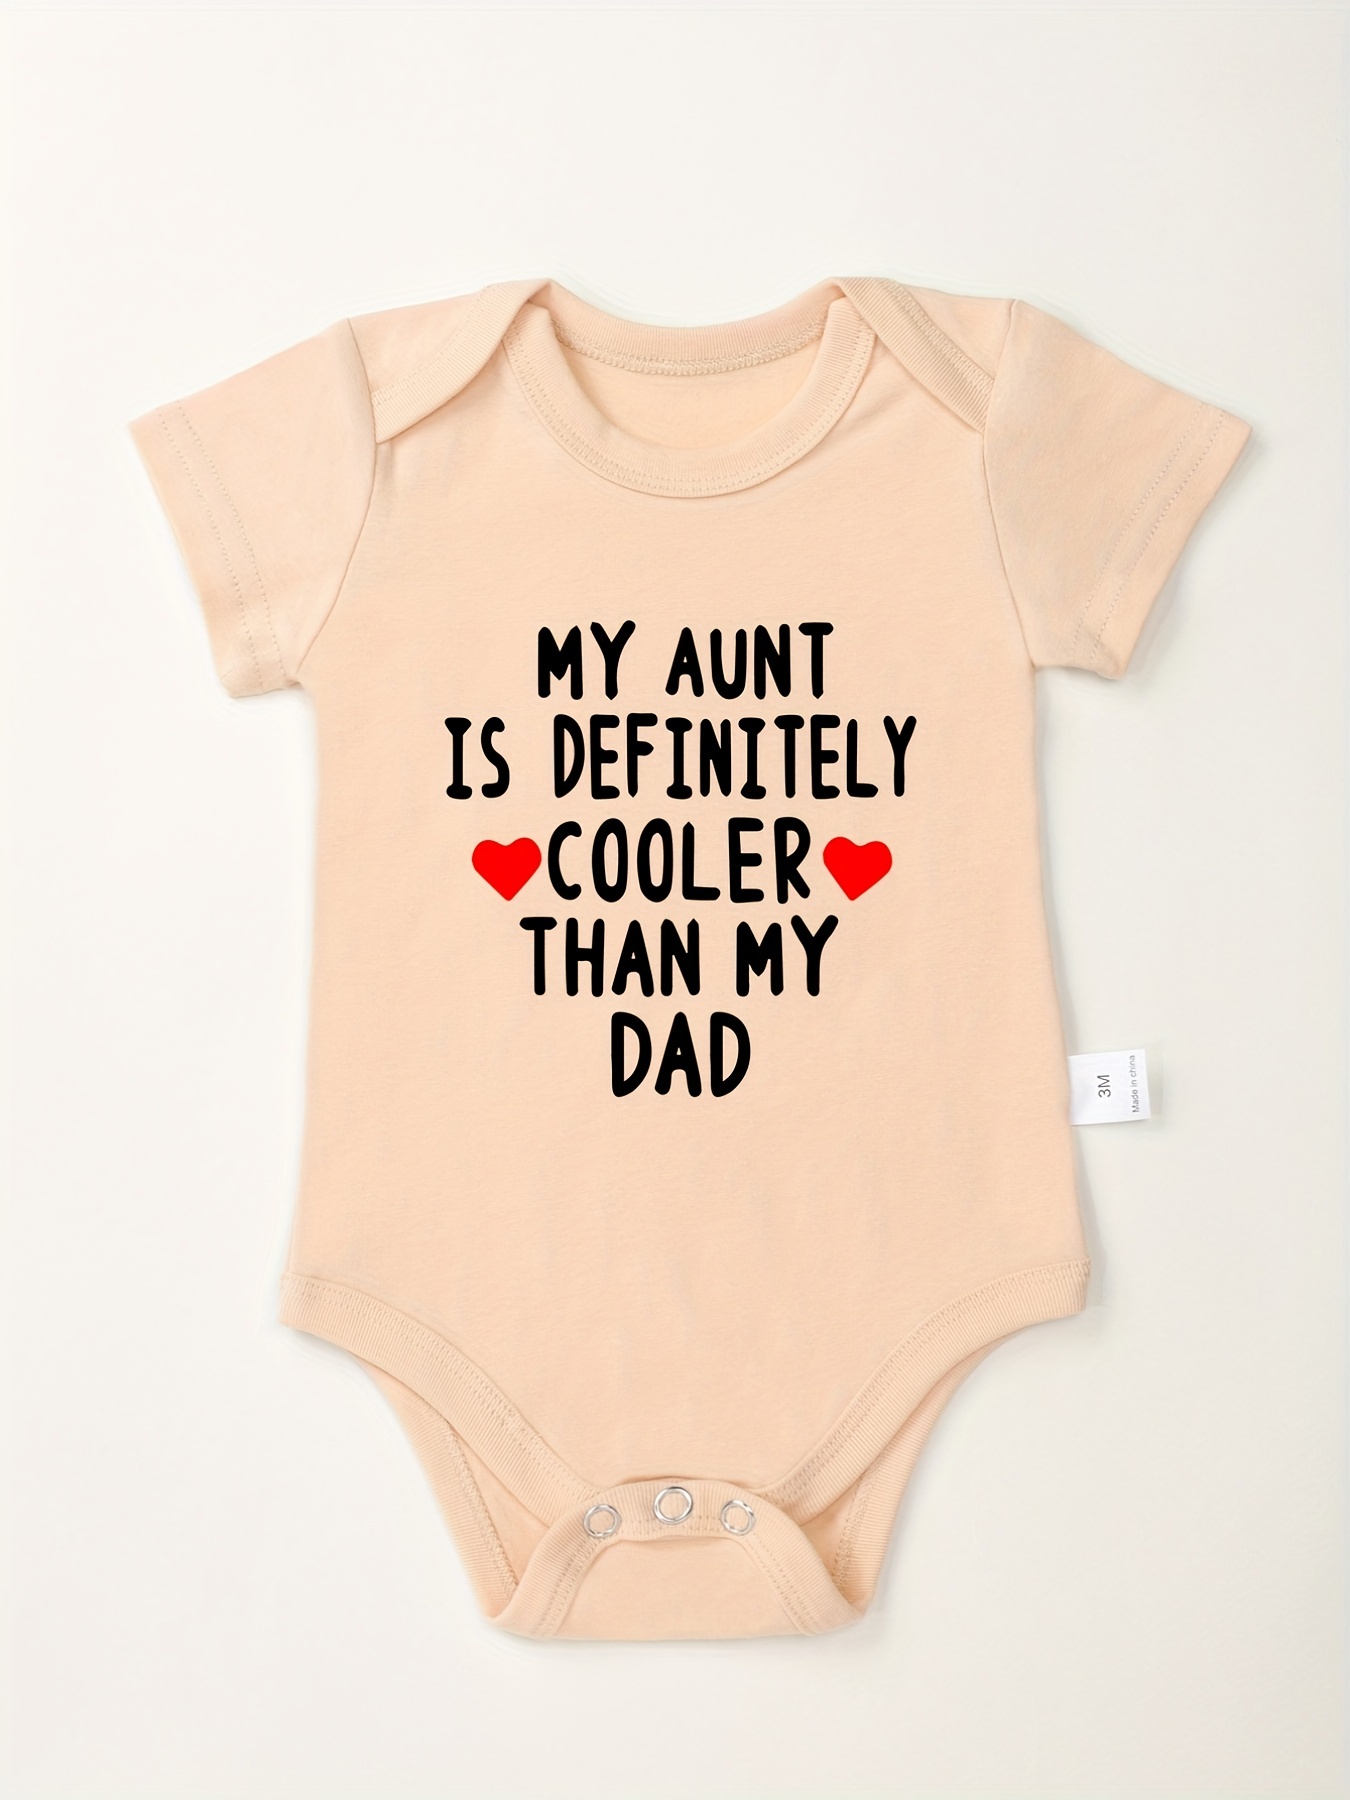 Toddler Jumpsuit My Aunt Says I'm Perfect Letter PrintSummer White